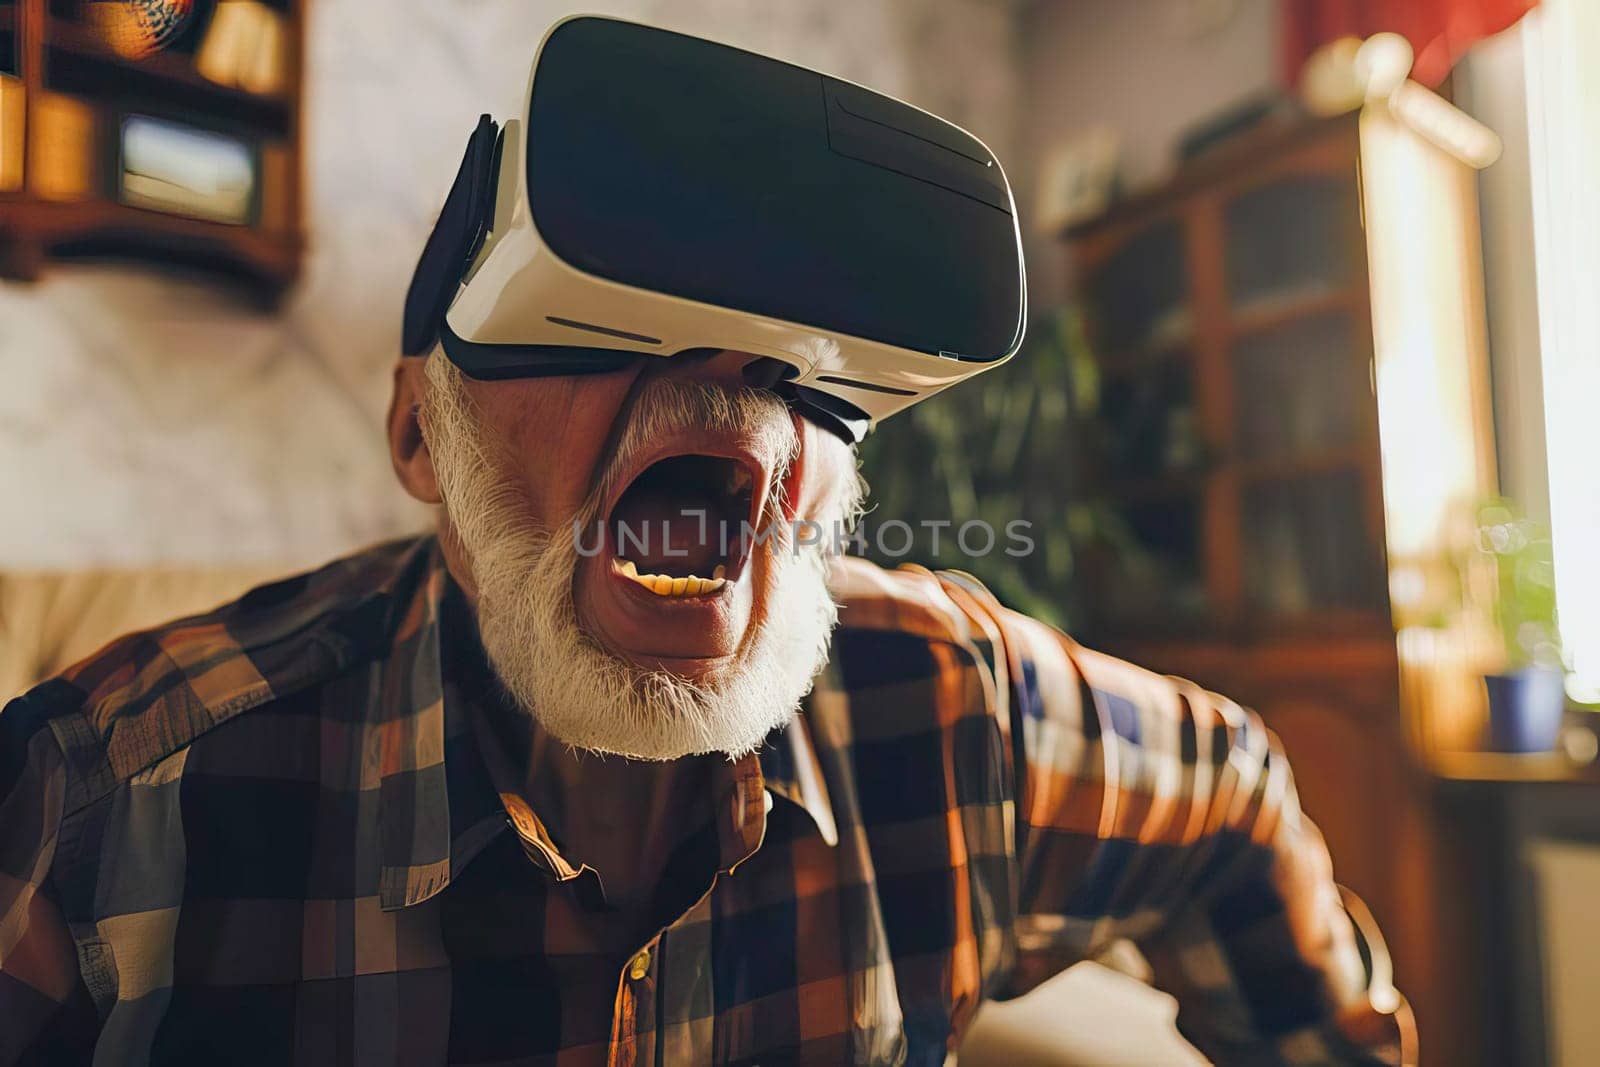 An elderly man actively using a virtual reality headset and appearing engaged in the experience. by vladimka